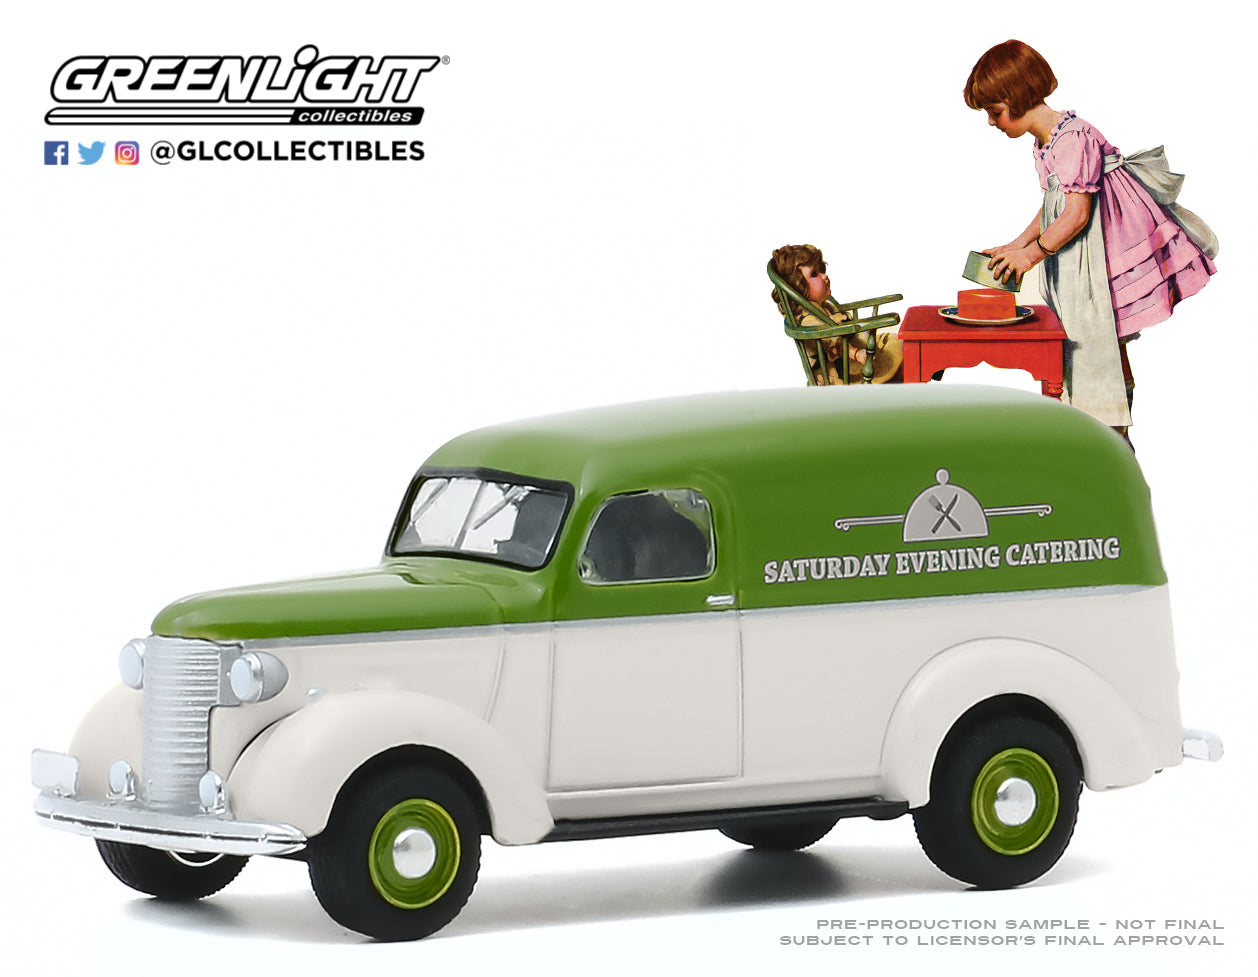 GreenLight 1:64 Norman Rockwell Series 3 - 1939 Chevrolet Panel Truck 54040-A